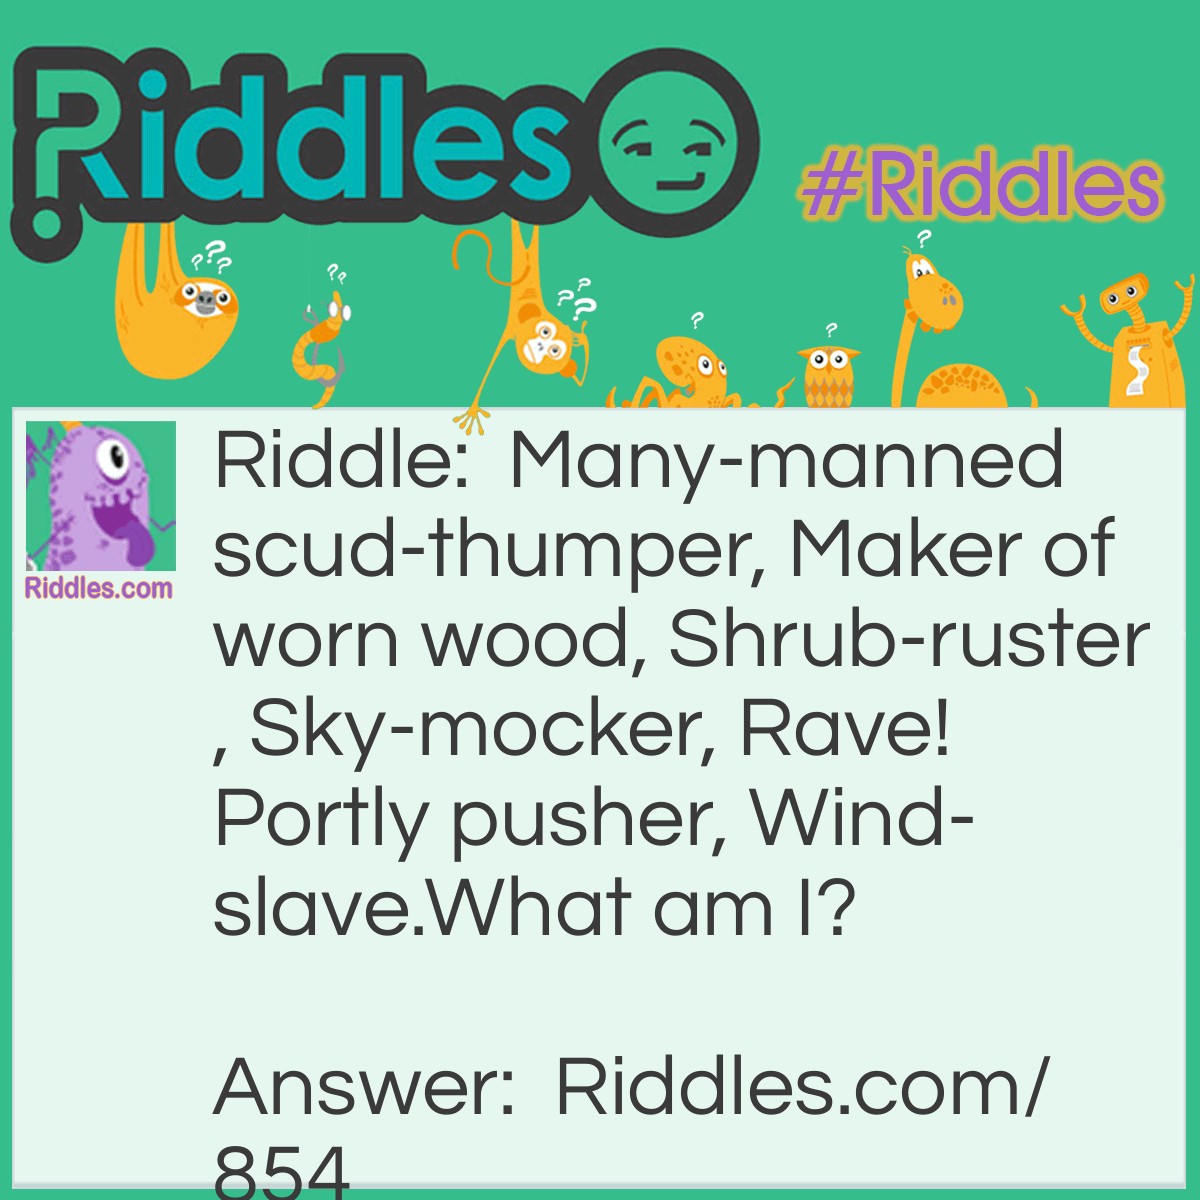 Riddle: Many-manned scud-thumper, Maker of worn wood, Shrub-ruster, Sky-mocker, Rave! Portly pusher, Wind-slave.
What am I? Answer: The ocean!